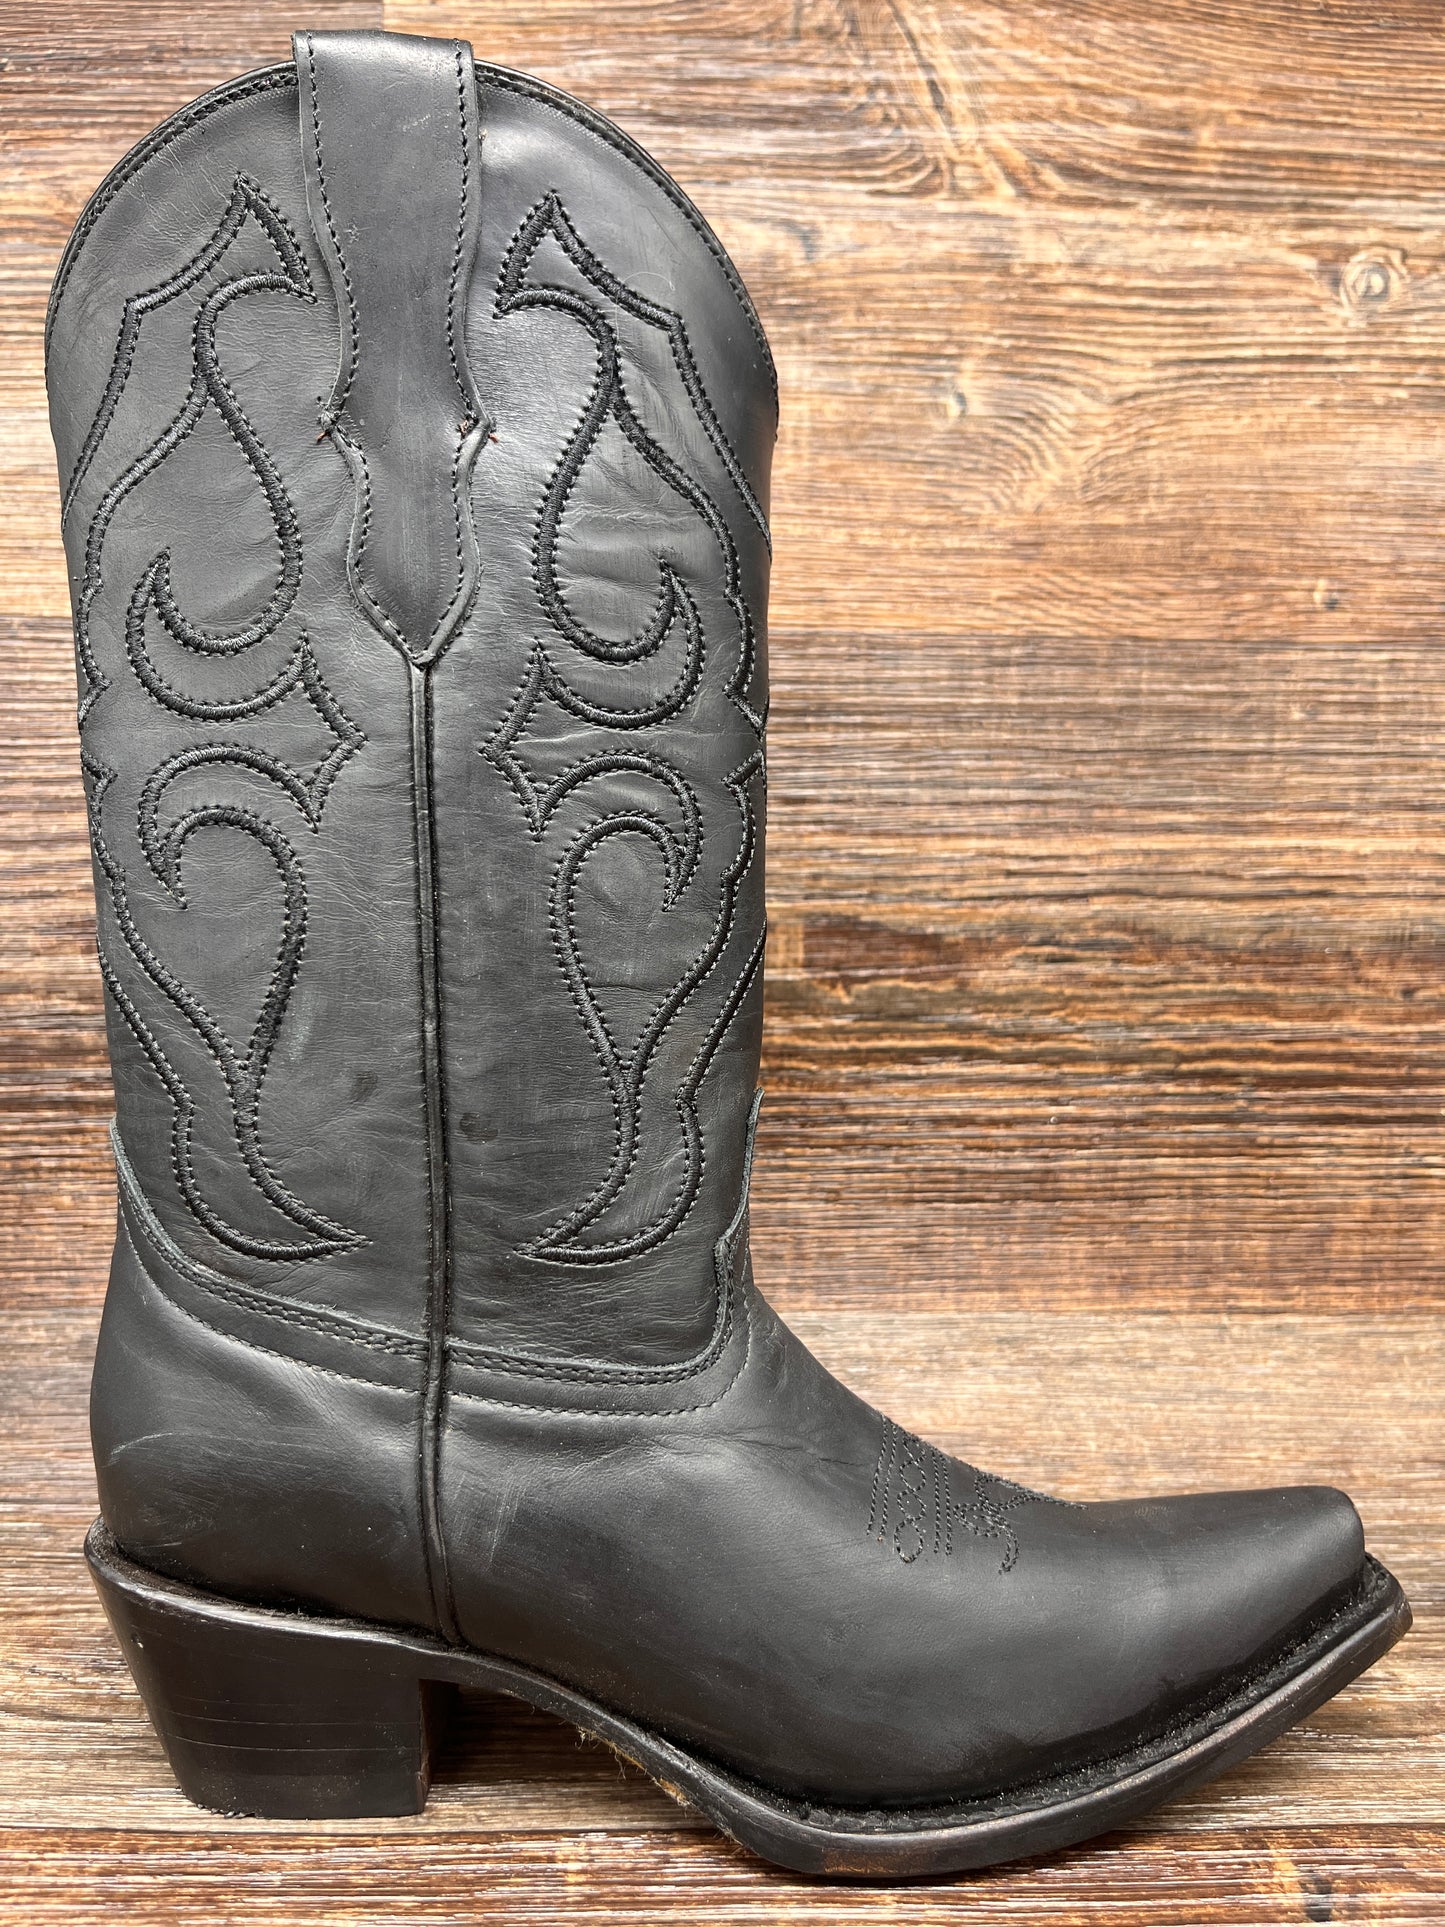 T0141 Teens Black on Black Embroidery Snip Toe Western Boot by Corral